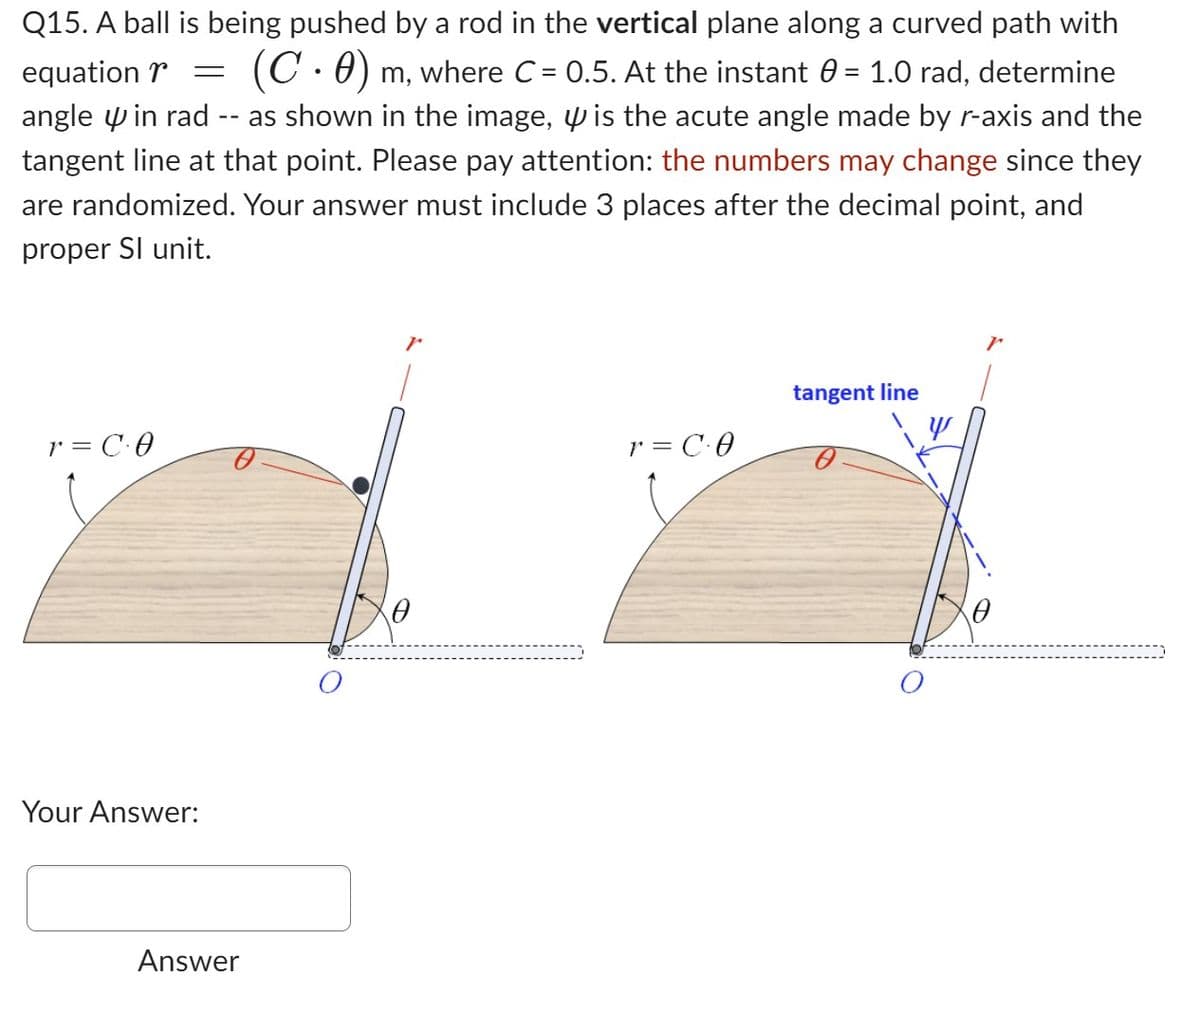 Q15. A ball is being pushed by a rod in the vertical plane along a curved path with
equation = (C.0) m, where C = 0.5. At the instant 0 = 1.0 rad, determine
angle in rad as shown in the image, is the acute angle made by r-axis and the
tangent line at that point. Please pay attention: the numbers may change since they
are randomized. Your answer must include 3 places after the decimal point, and
proper Sl unit.
r = CO
Your Answer:
Answer
r
0
r = CO
tangent line
Y
0